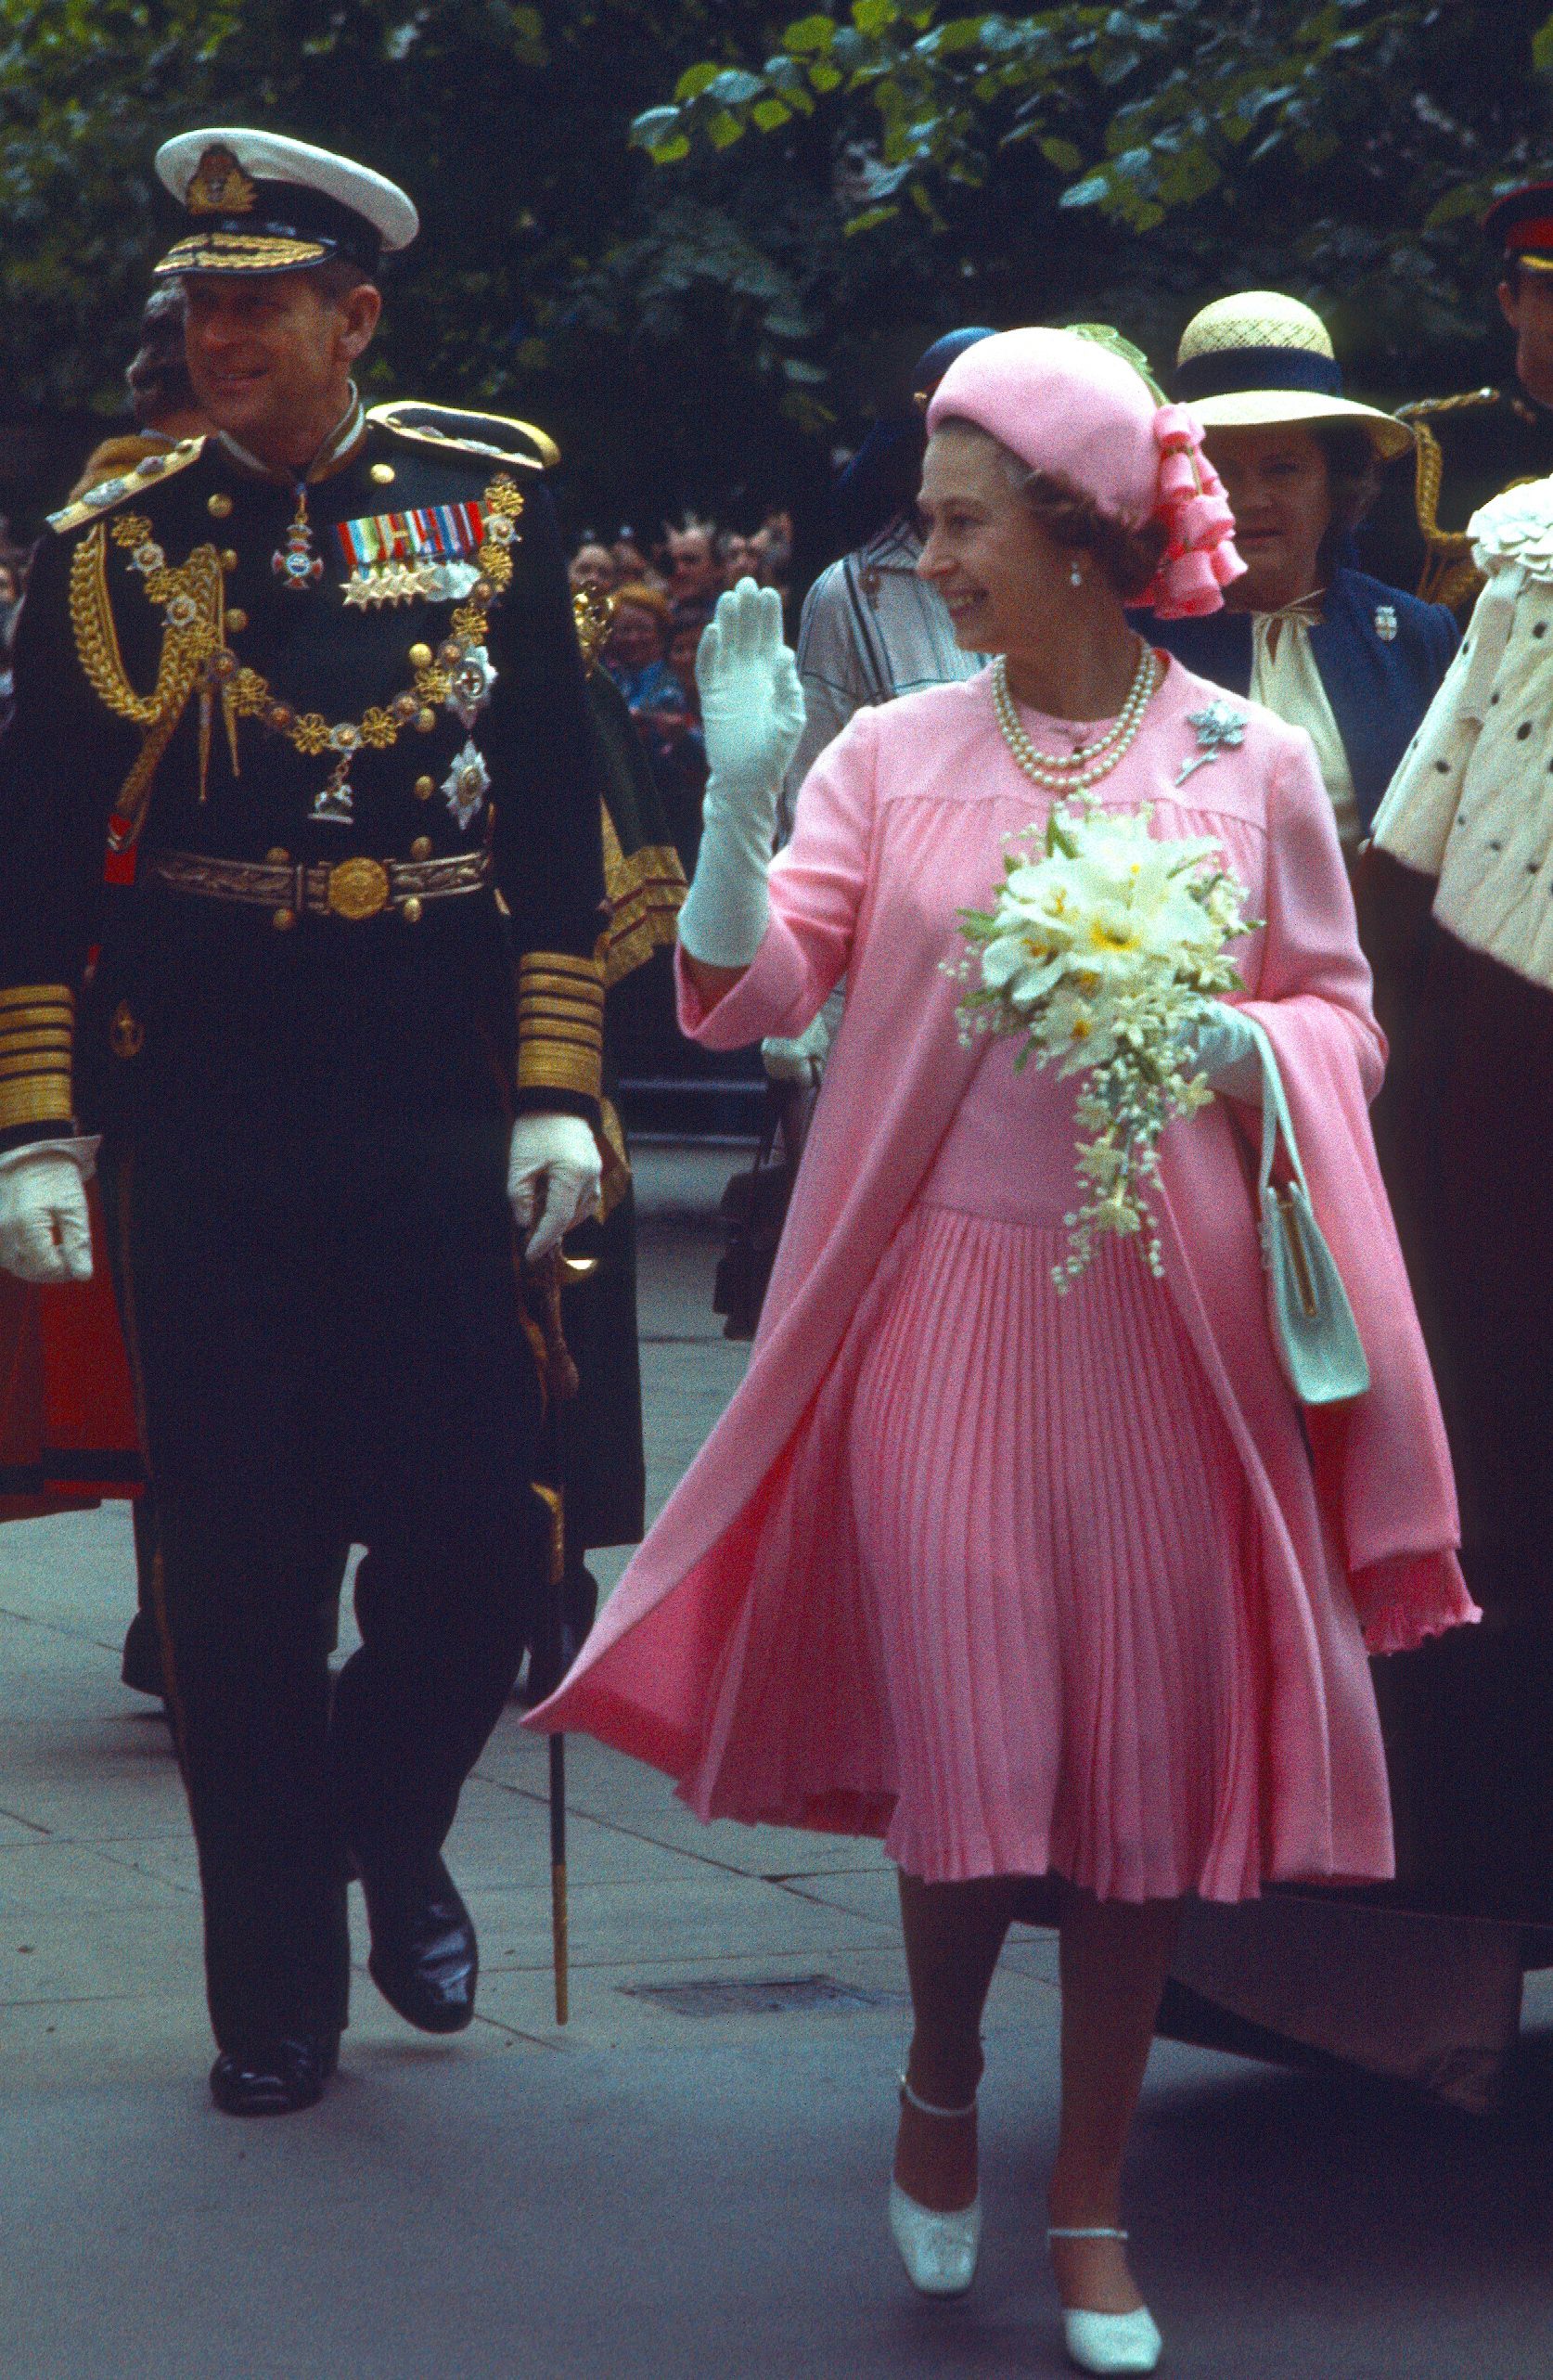 Queen Elizabeth's Silver Jubilee Photos - See the Real Life